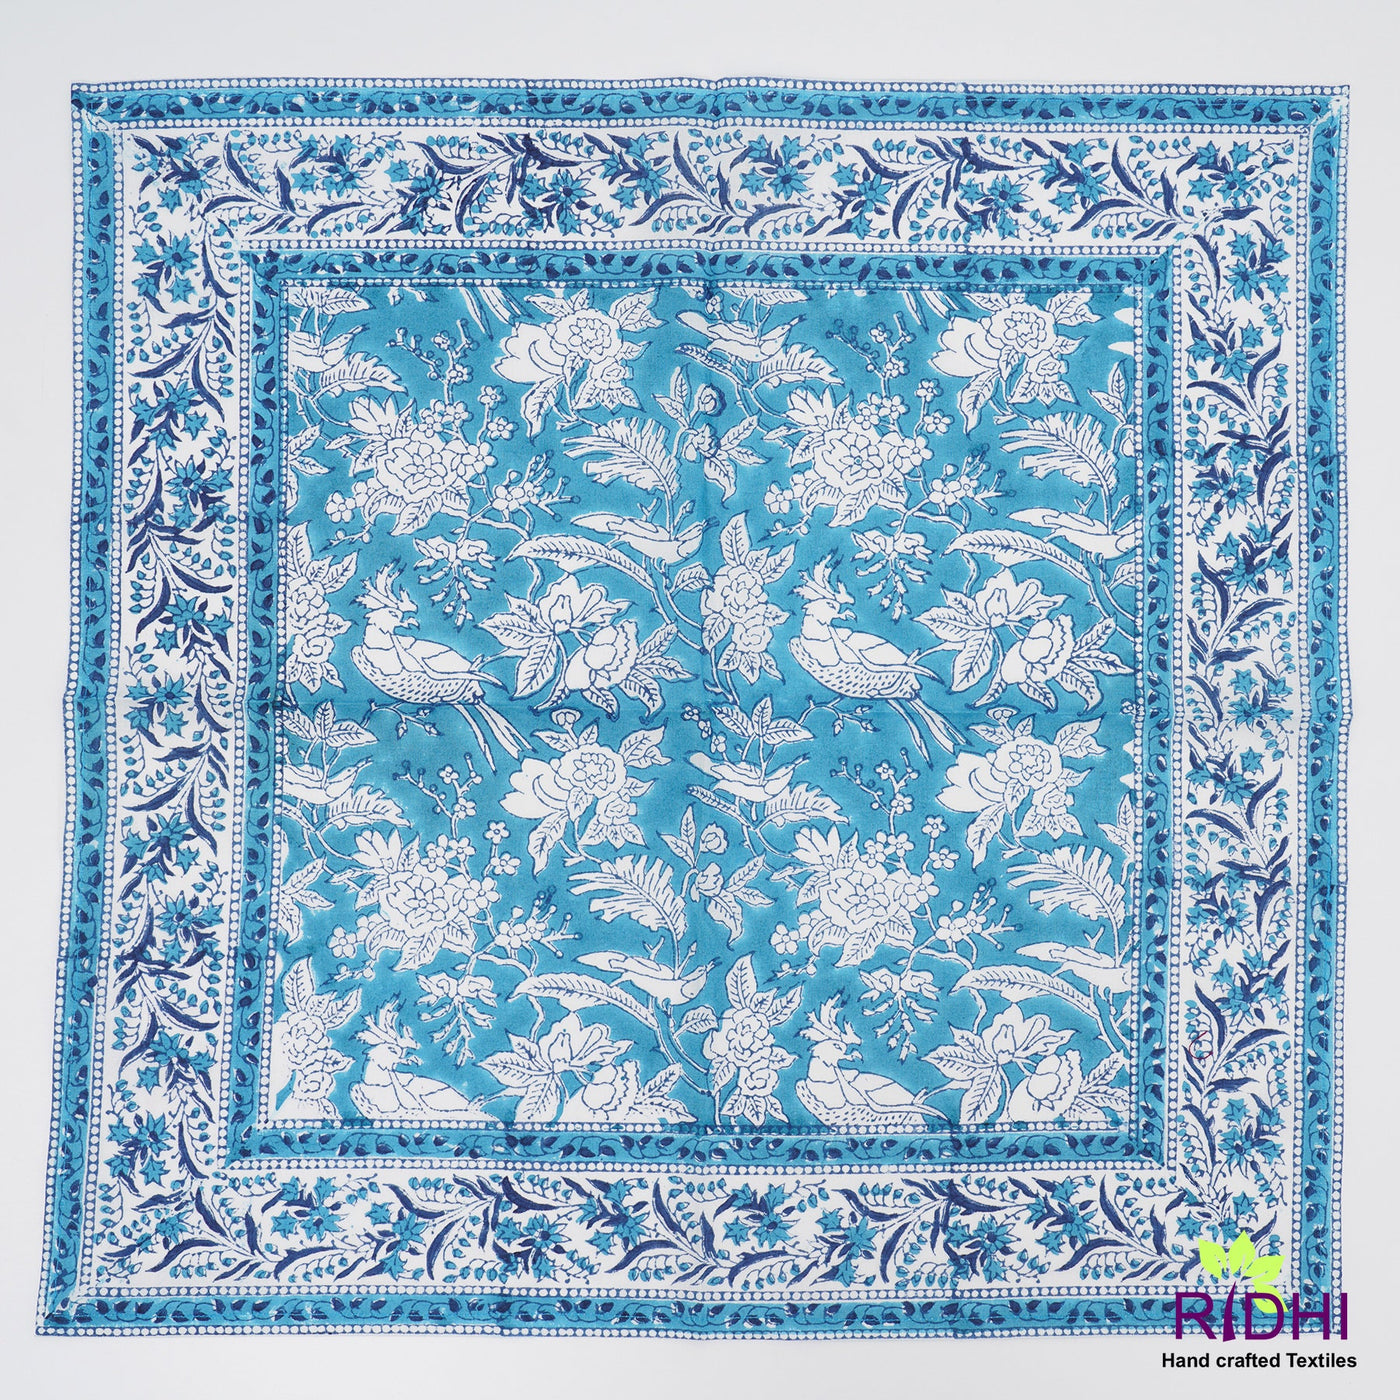 Sapphire Blue and White Indian Hand Block Floral Printed 100% Pure Cotton Cloth Napkins Size 20x20" Set of 4,6,12,24,48 Christmas Decoration